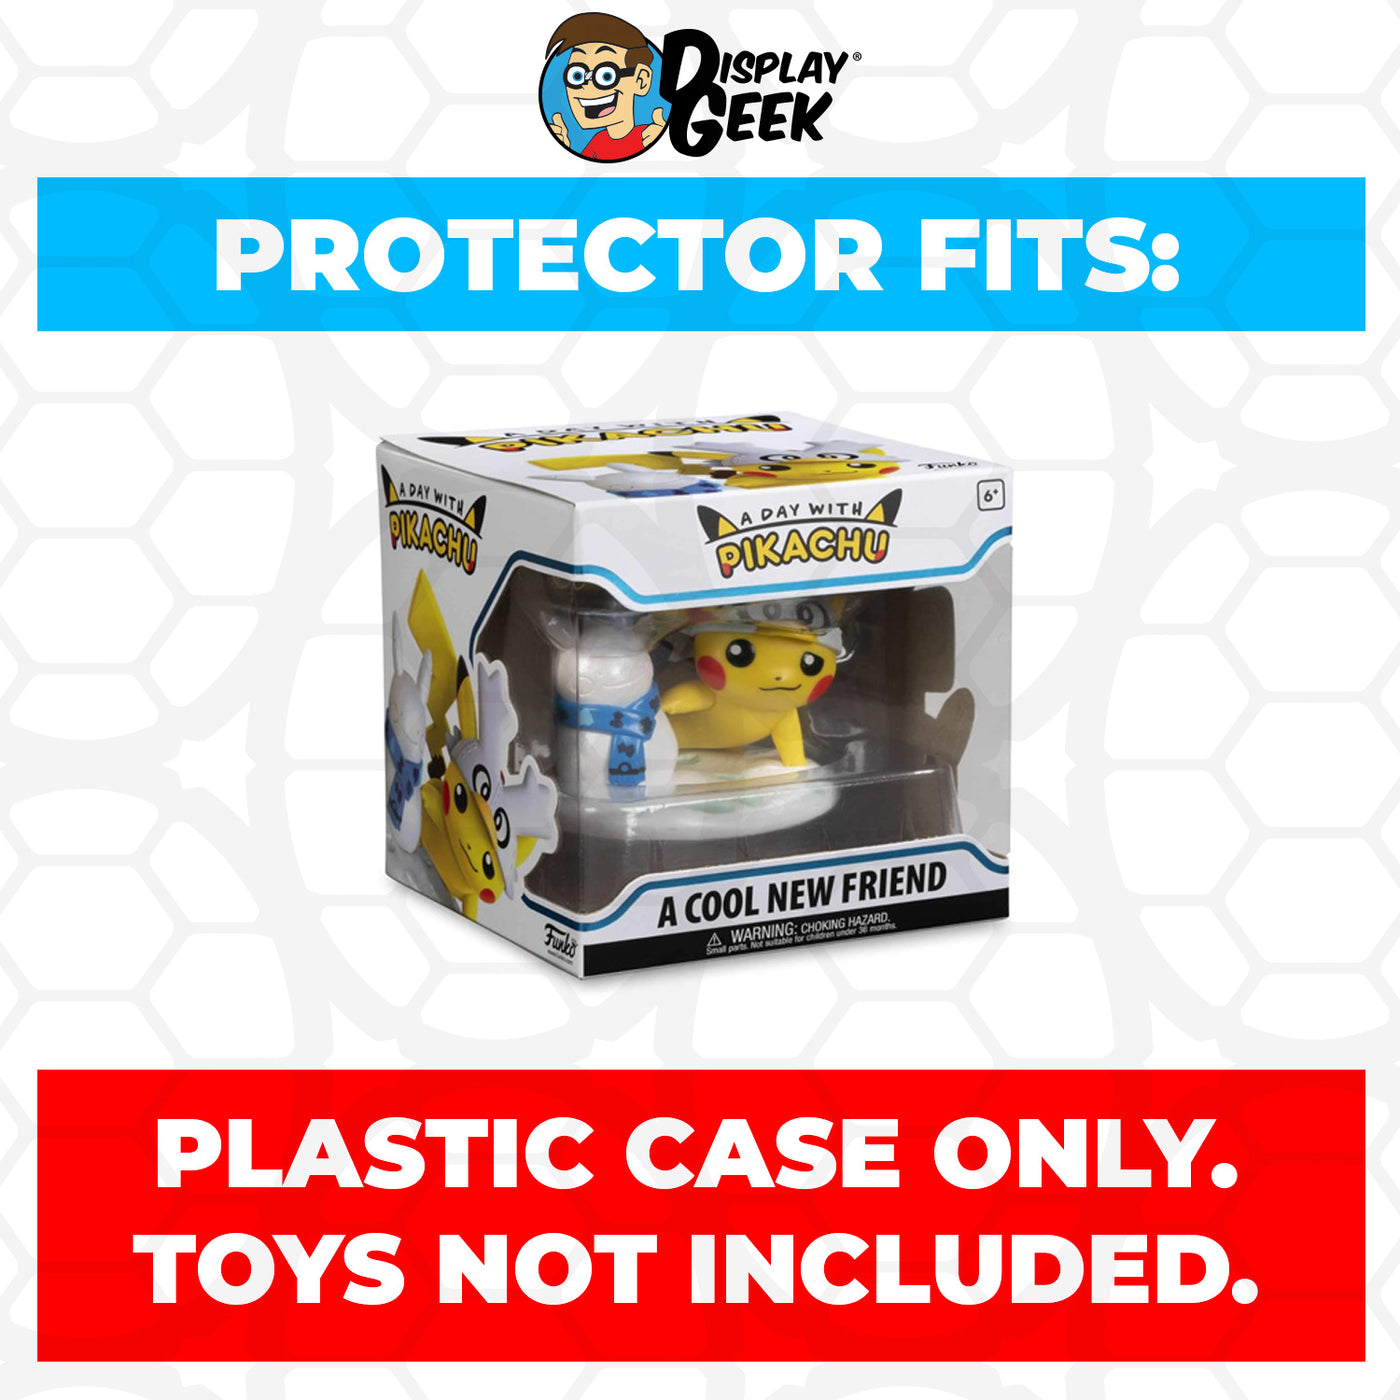 Pop Protector for A Cool New Friend Funko A Day with Pikachu on The Protector Guide App by Display Geek